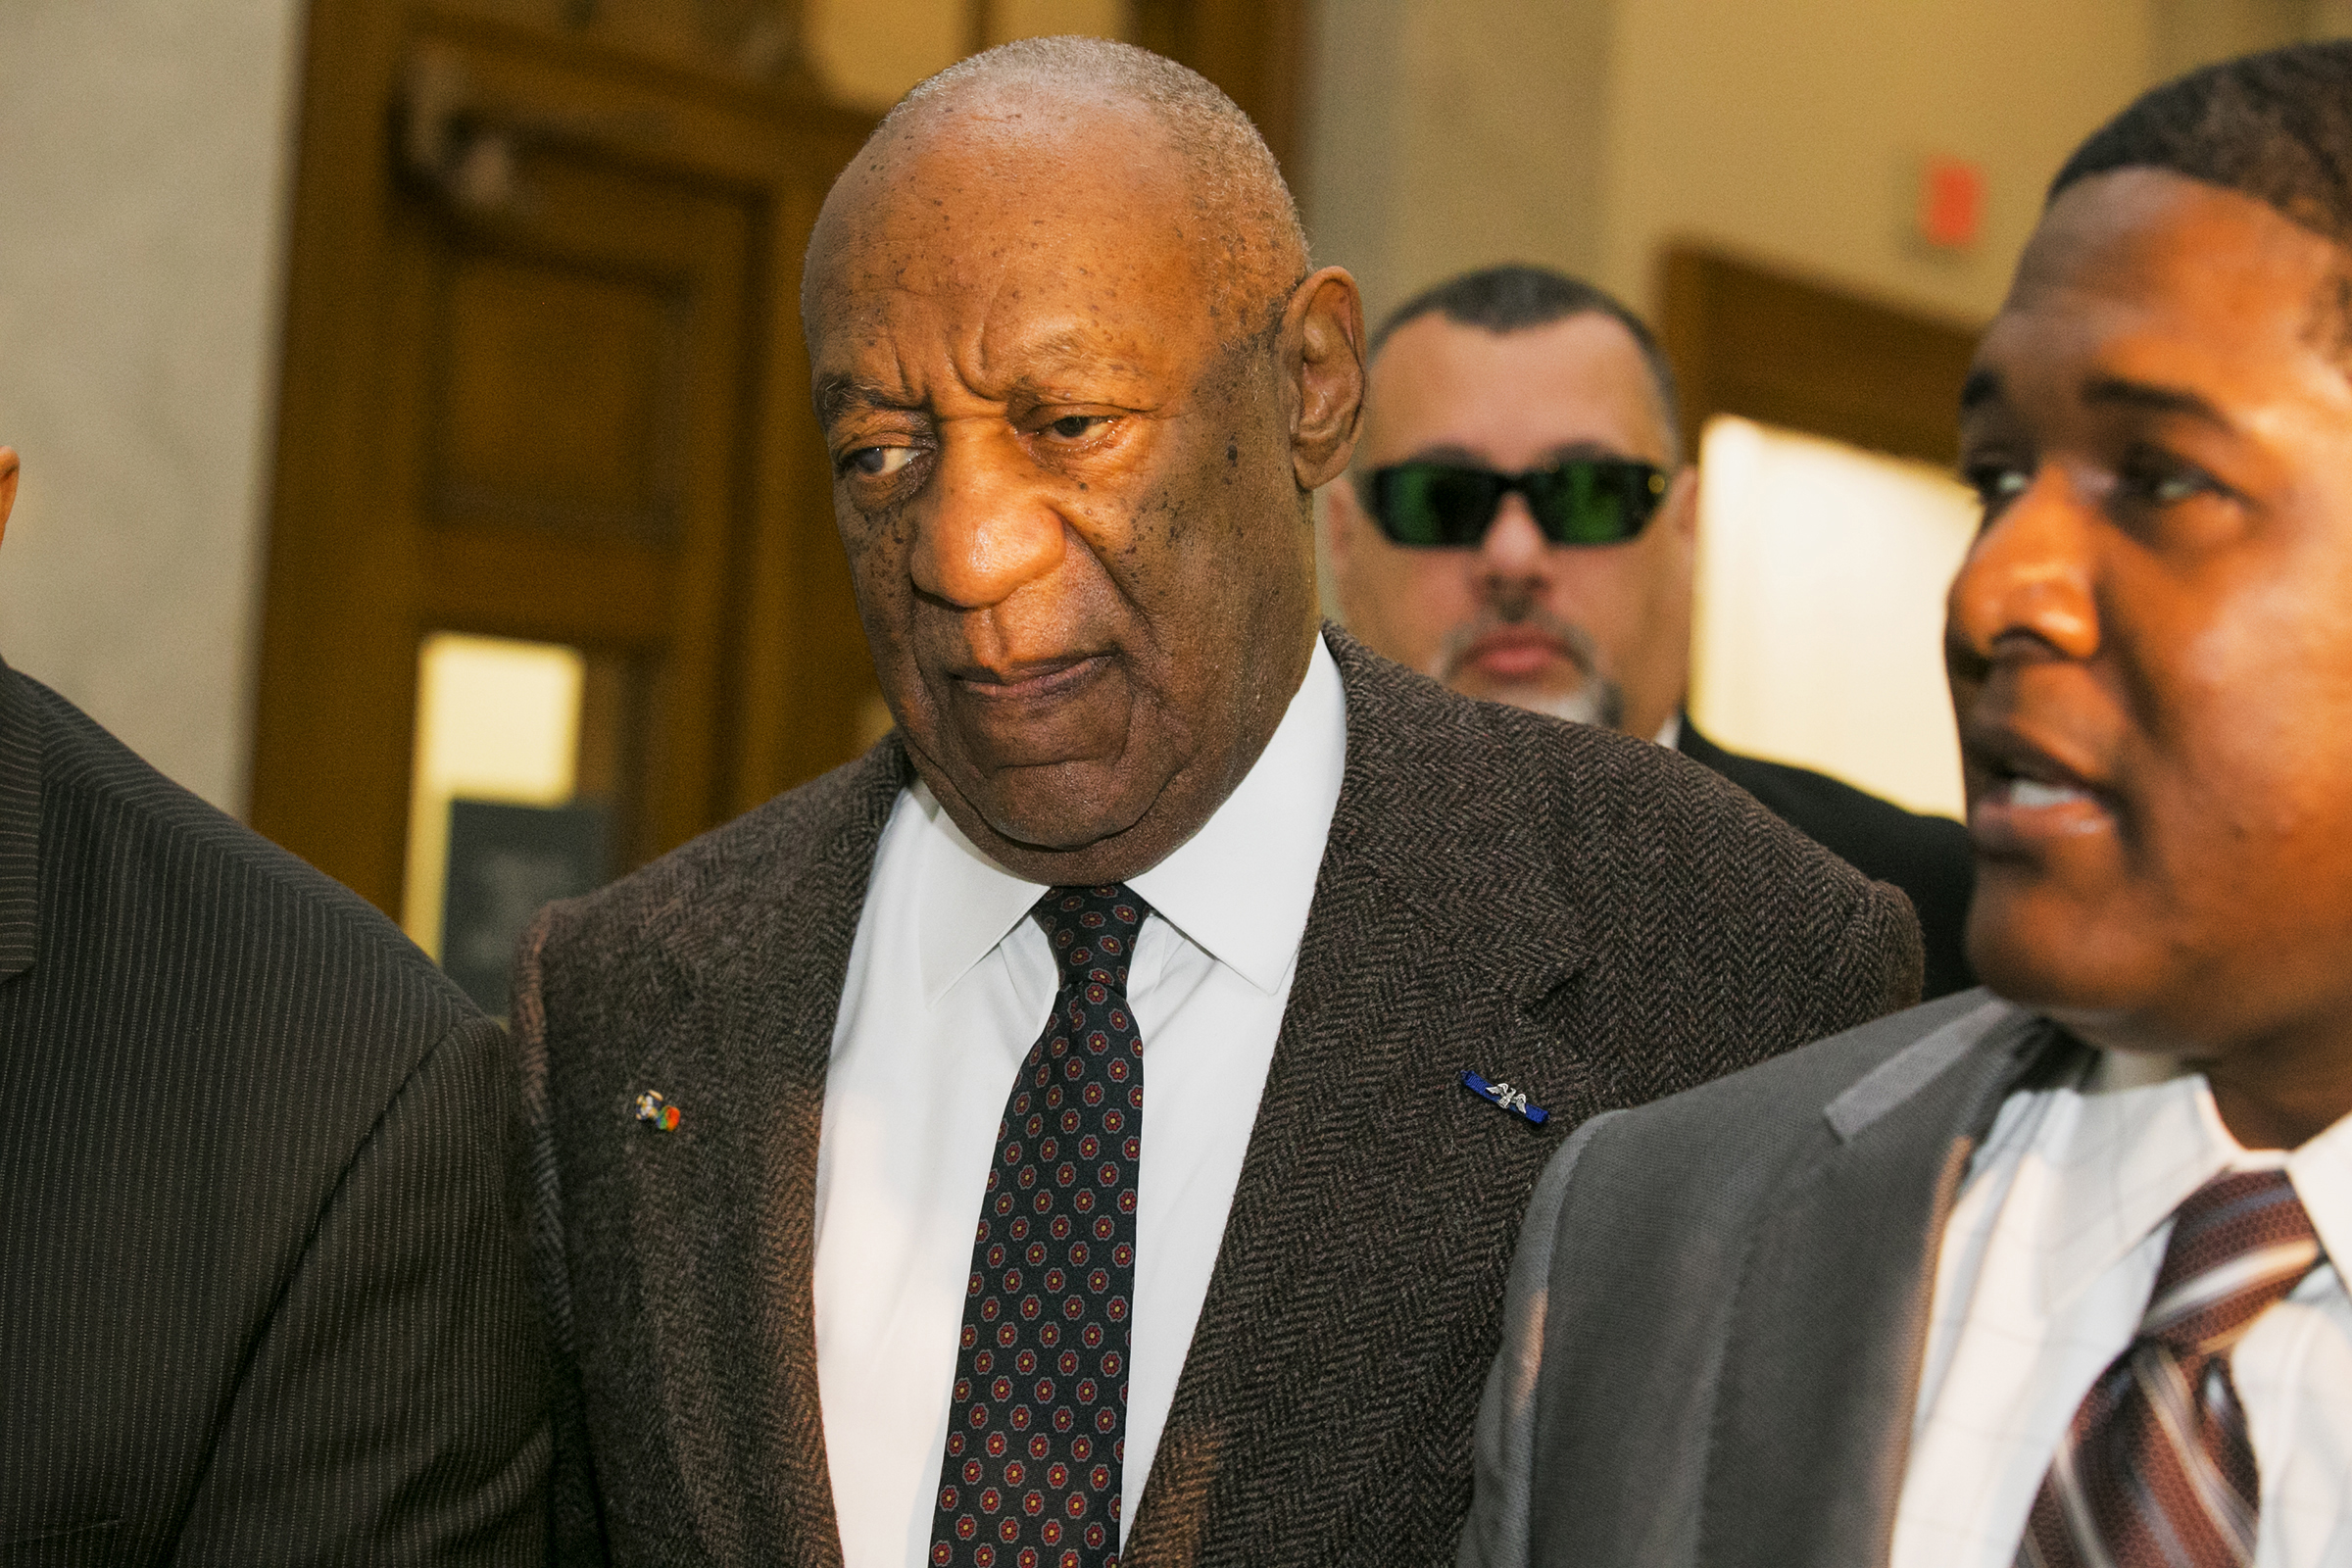 Actor and comedian Bill Cosby arrives for the second day of hearings at the Montgomery County Courthouse in Norristown, Pa., Feb. 3, 2016 (Reuters)